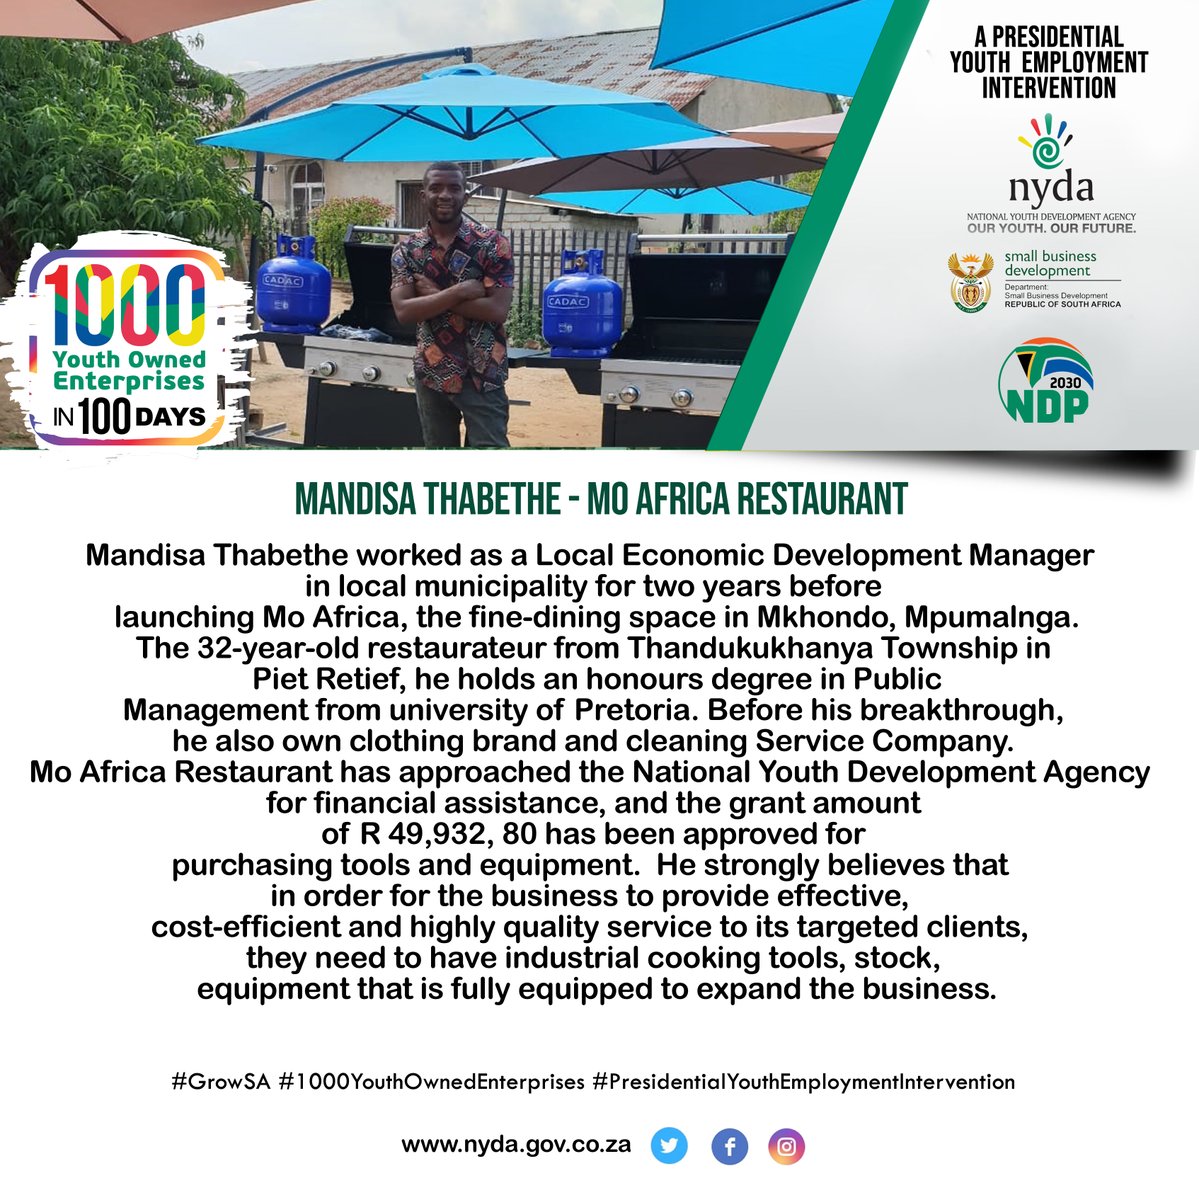 Mandisa Thabethe is one of the young people who've been funded by this amazing initiative that was announced by the President during the 2020 SONA.

Read about him and his business below: 

#GrowSA #1000youthownedenterprises #PresidentialYouthEmploymentIntervention